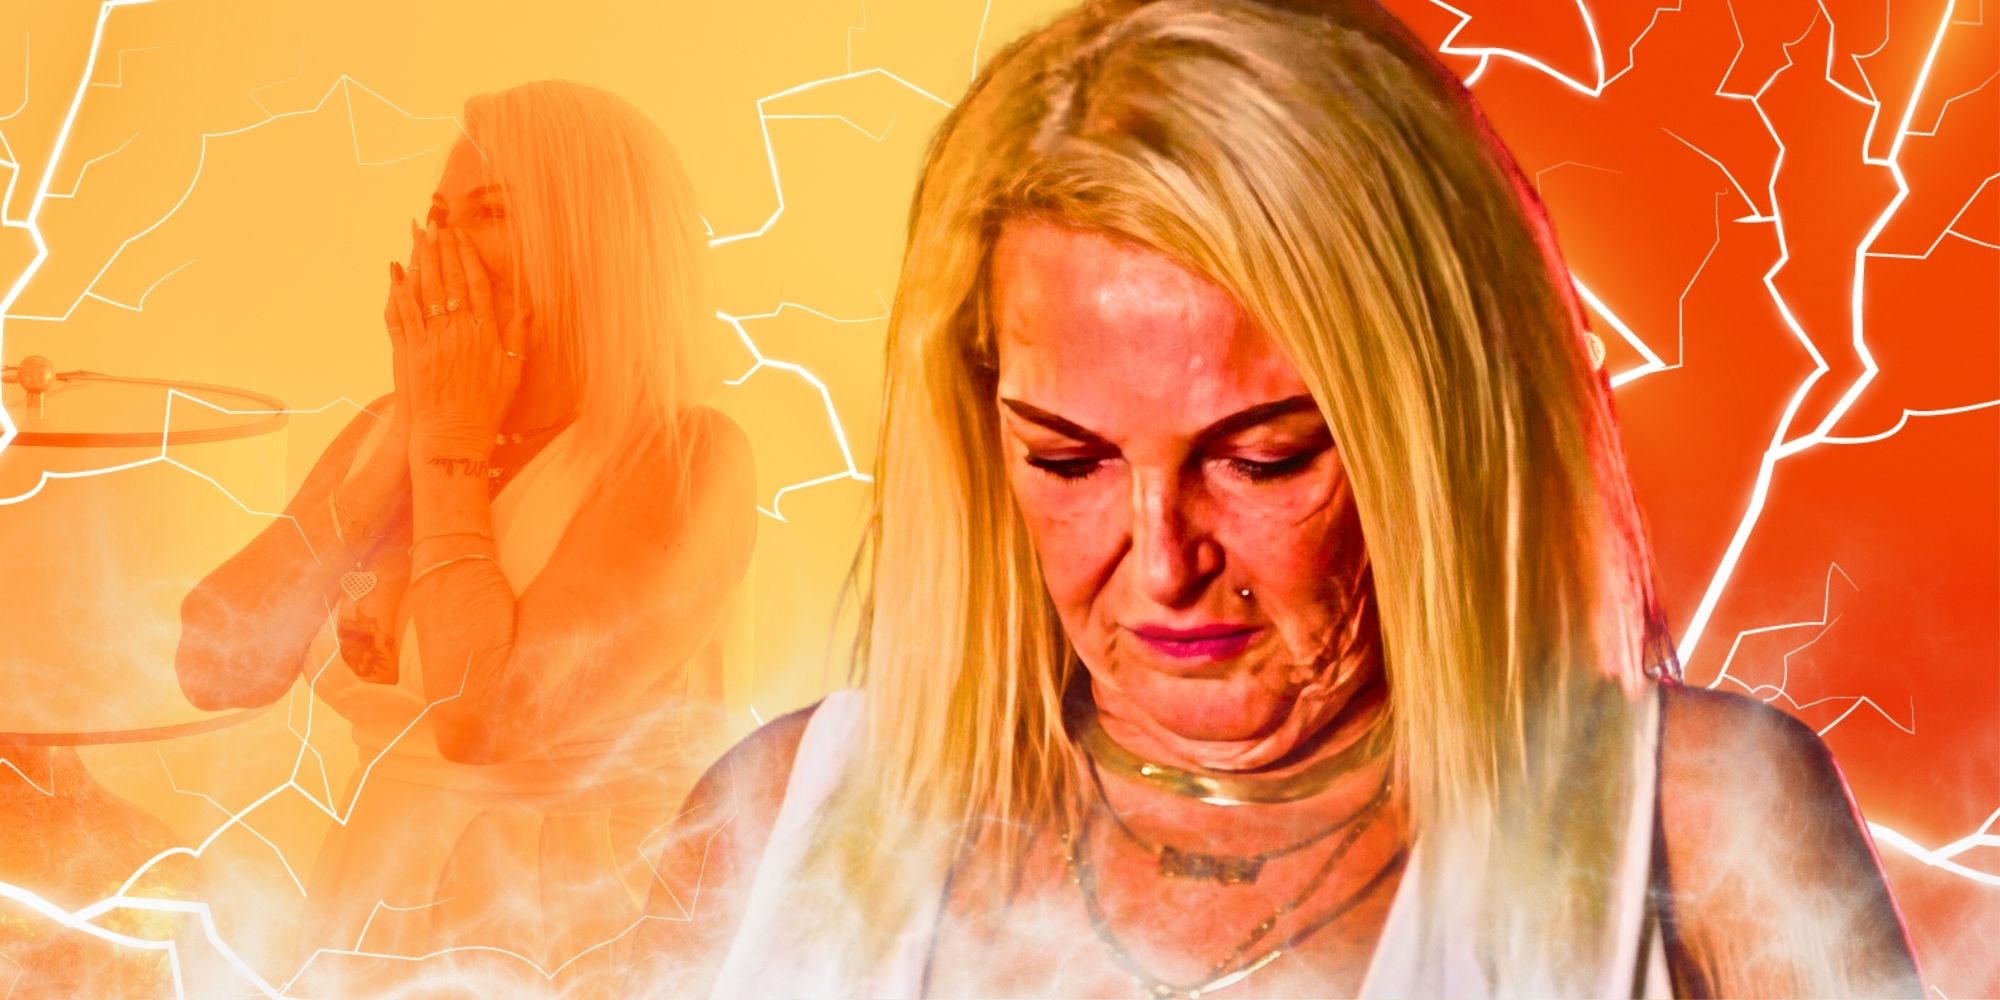 Montage of 90 Day Fiance's Angela Deem sad and crying, with lightning bolts in the background